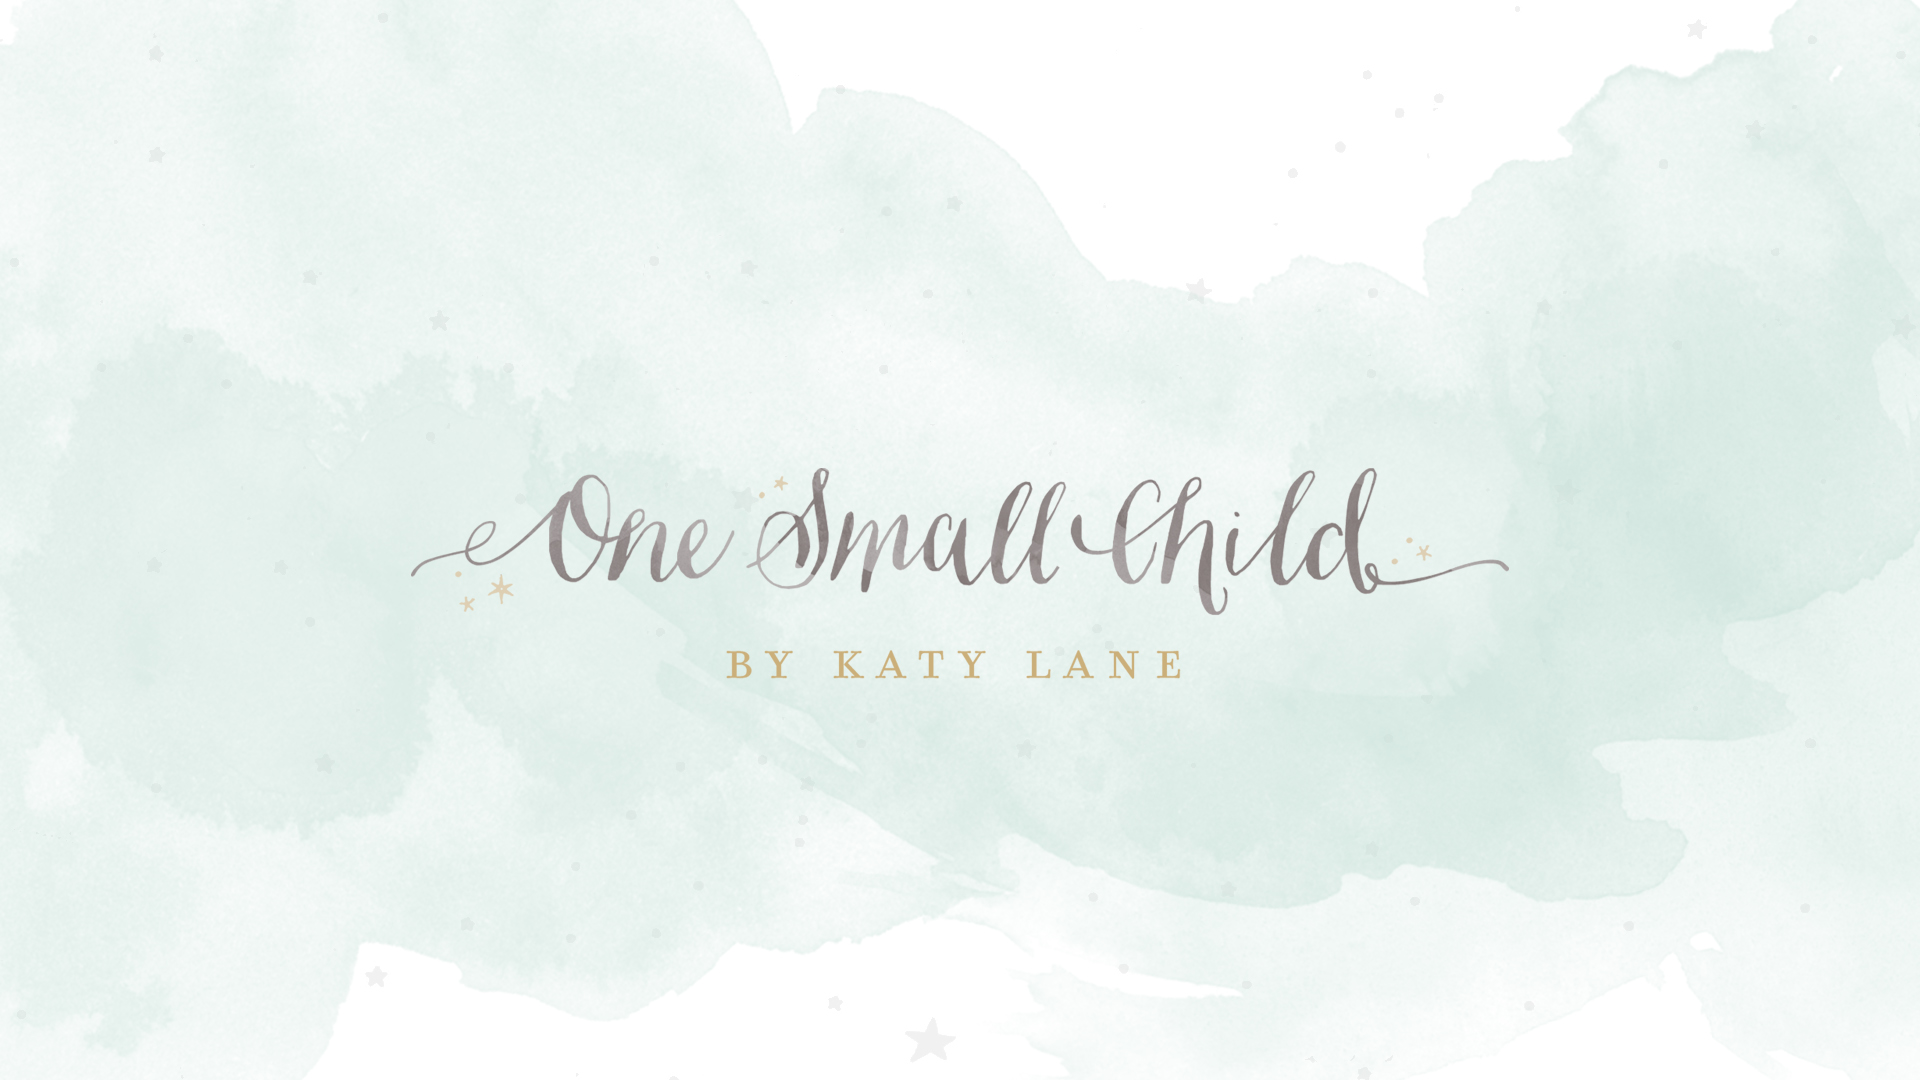 One Small Child by Katy Lane